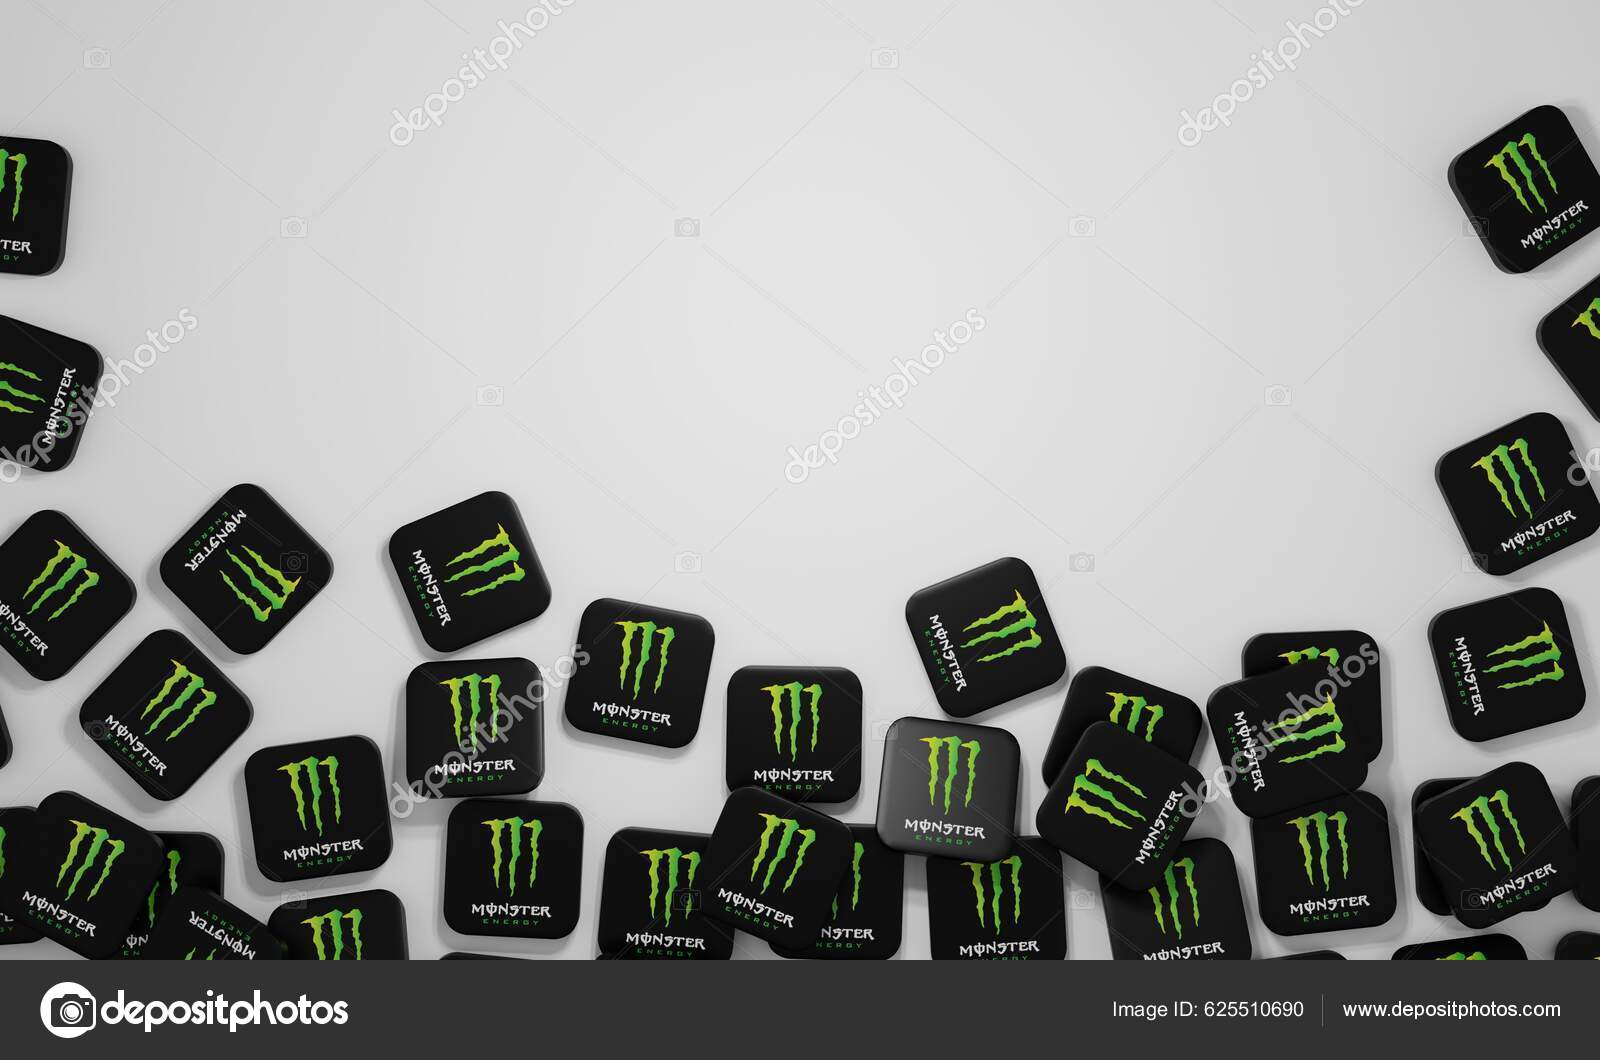 Monster energy drink Stock Photos, Royalty Free Monster energy drink Images  | Depositphotos